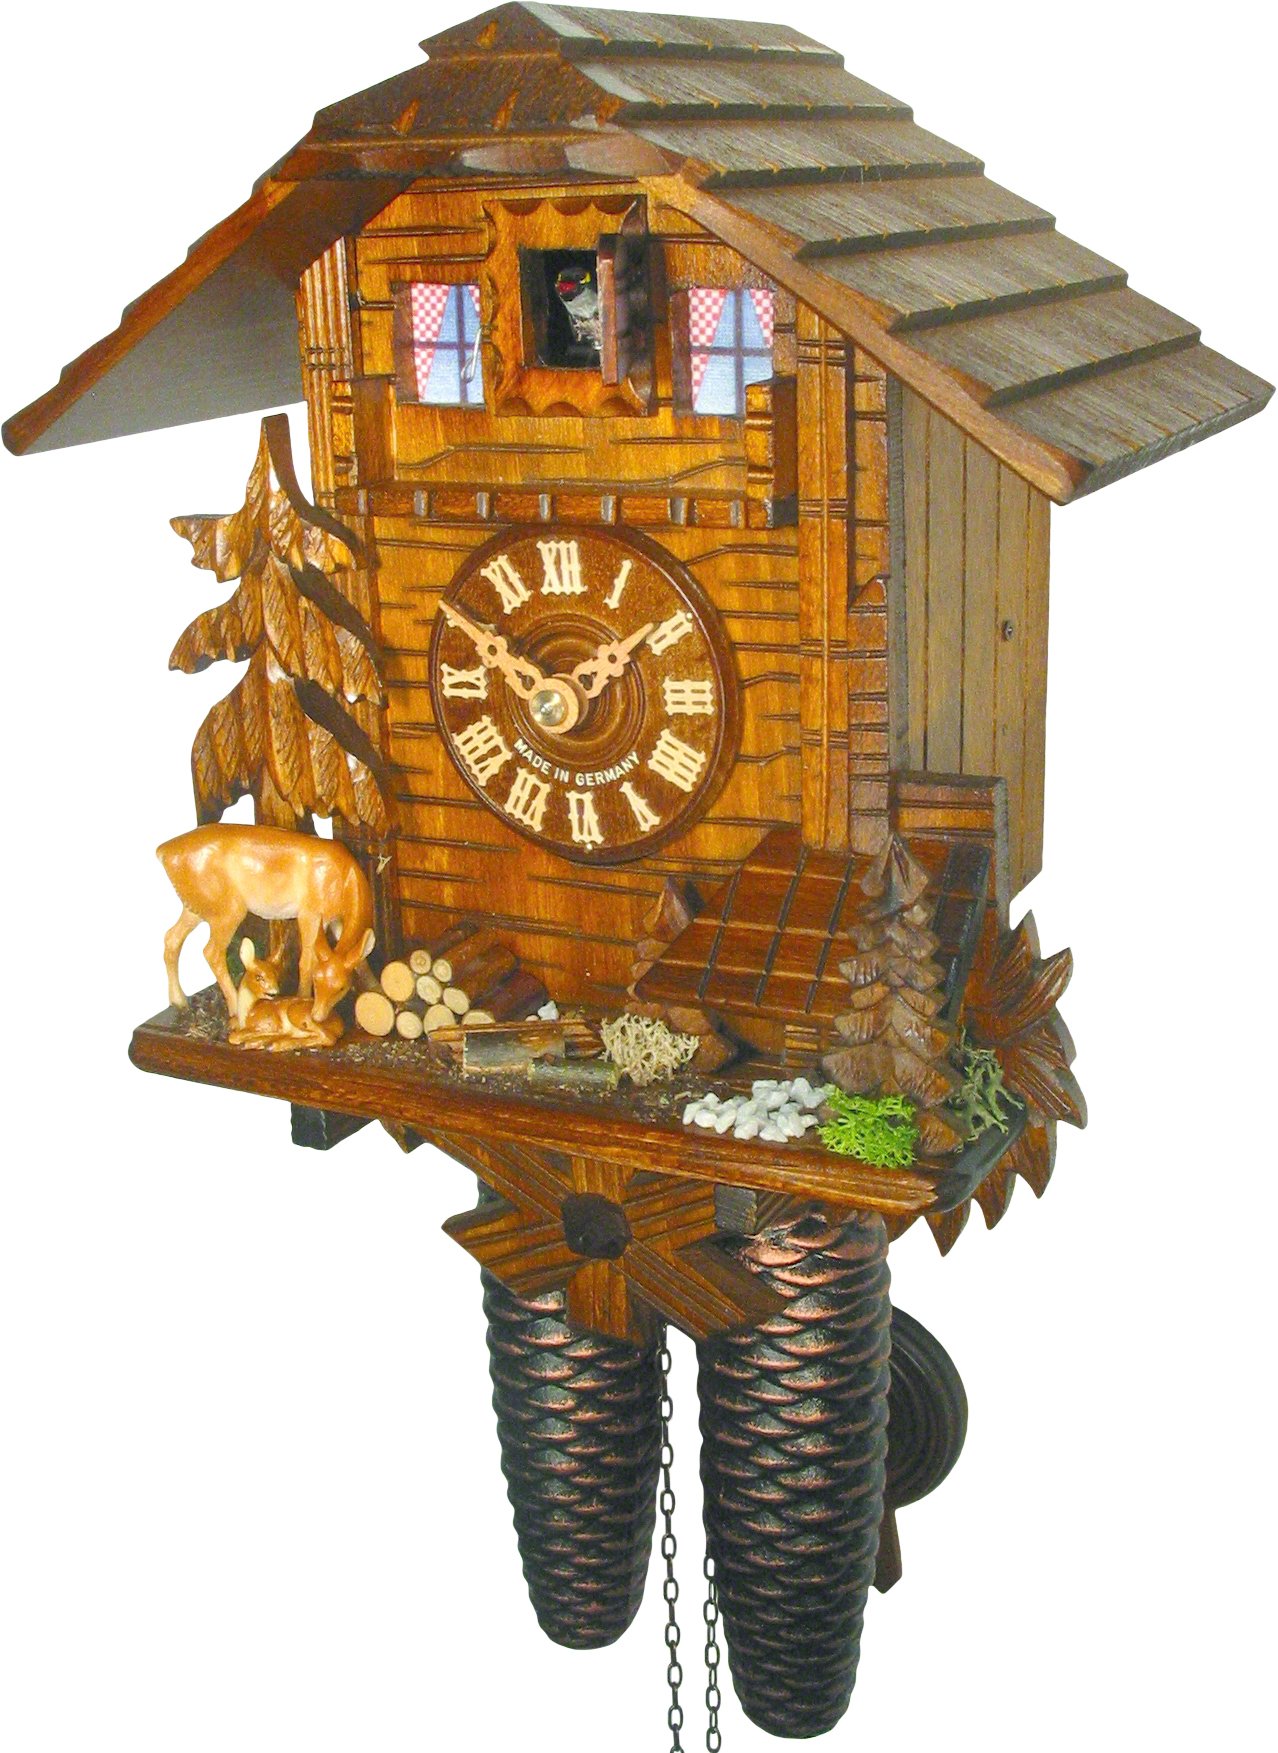 Cuckoo Clock Chalet Style 8 Day Movement 28cm by August Schwer